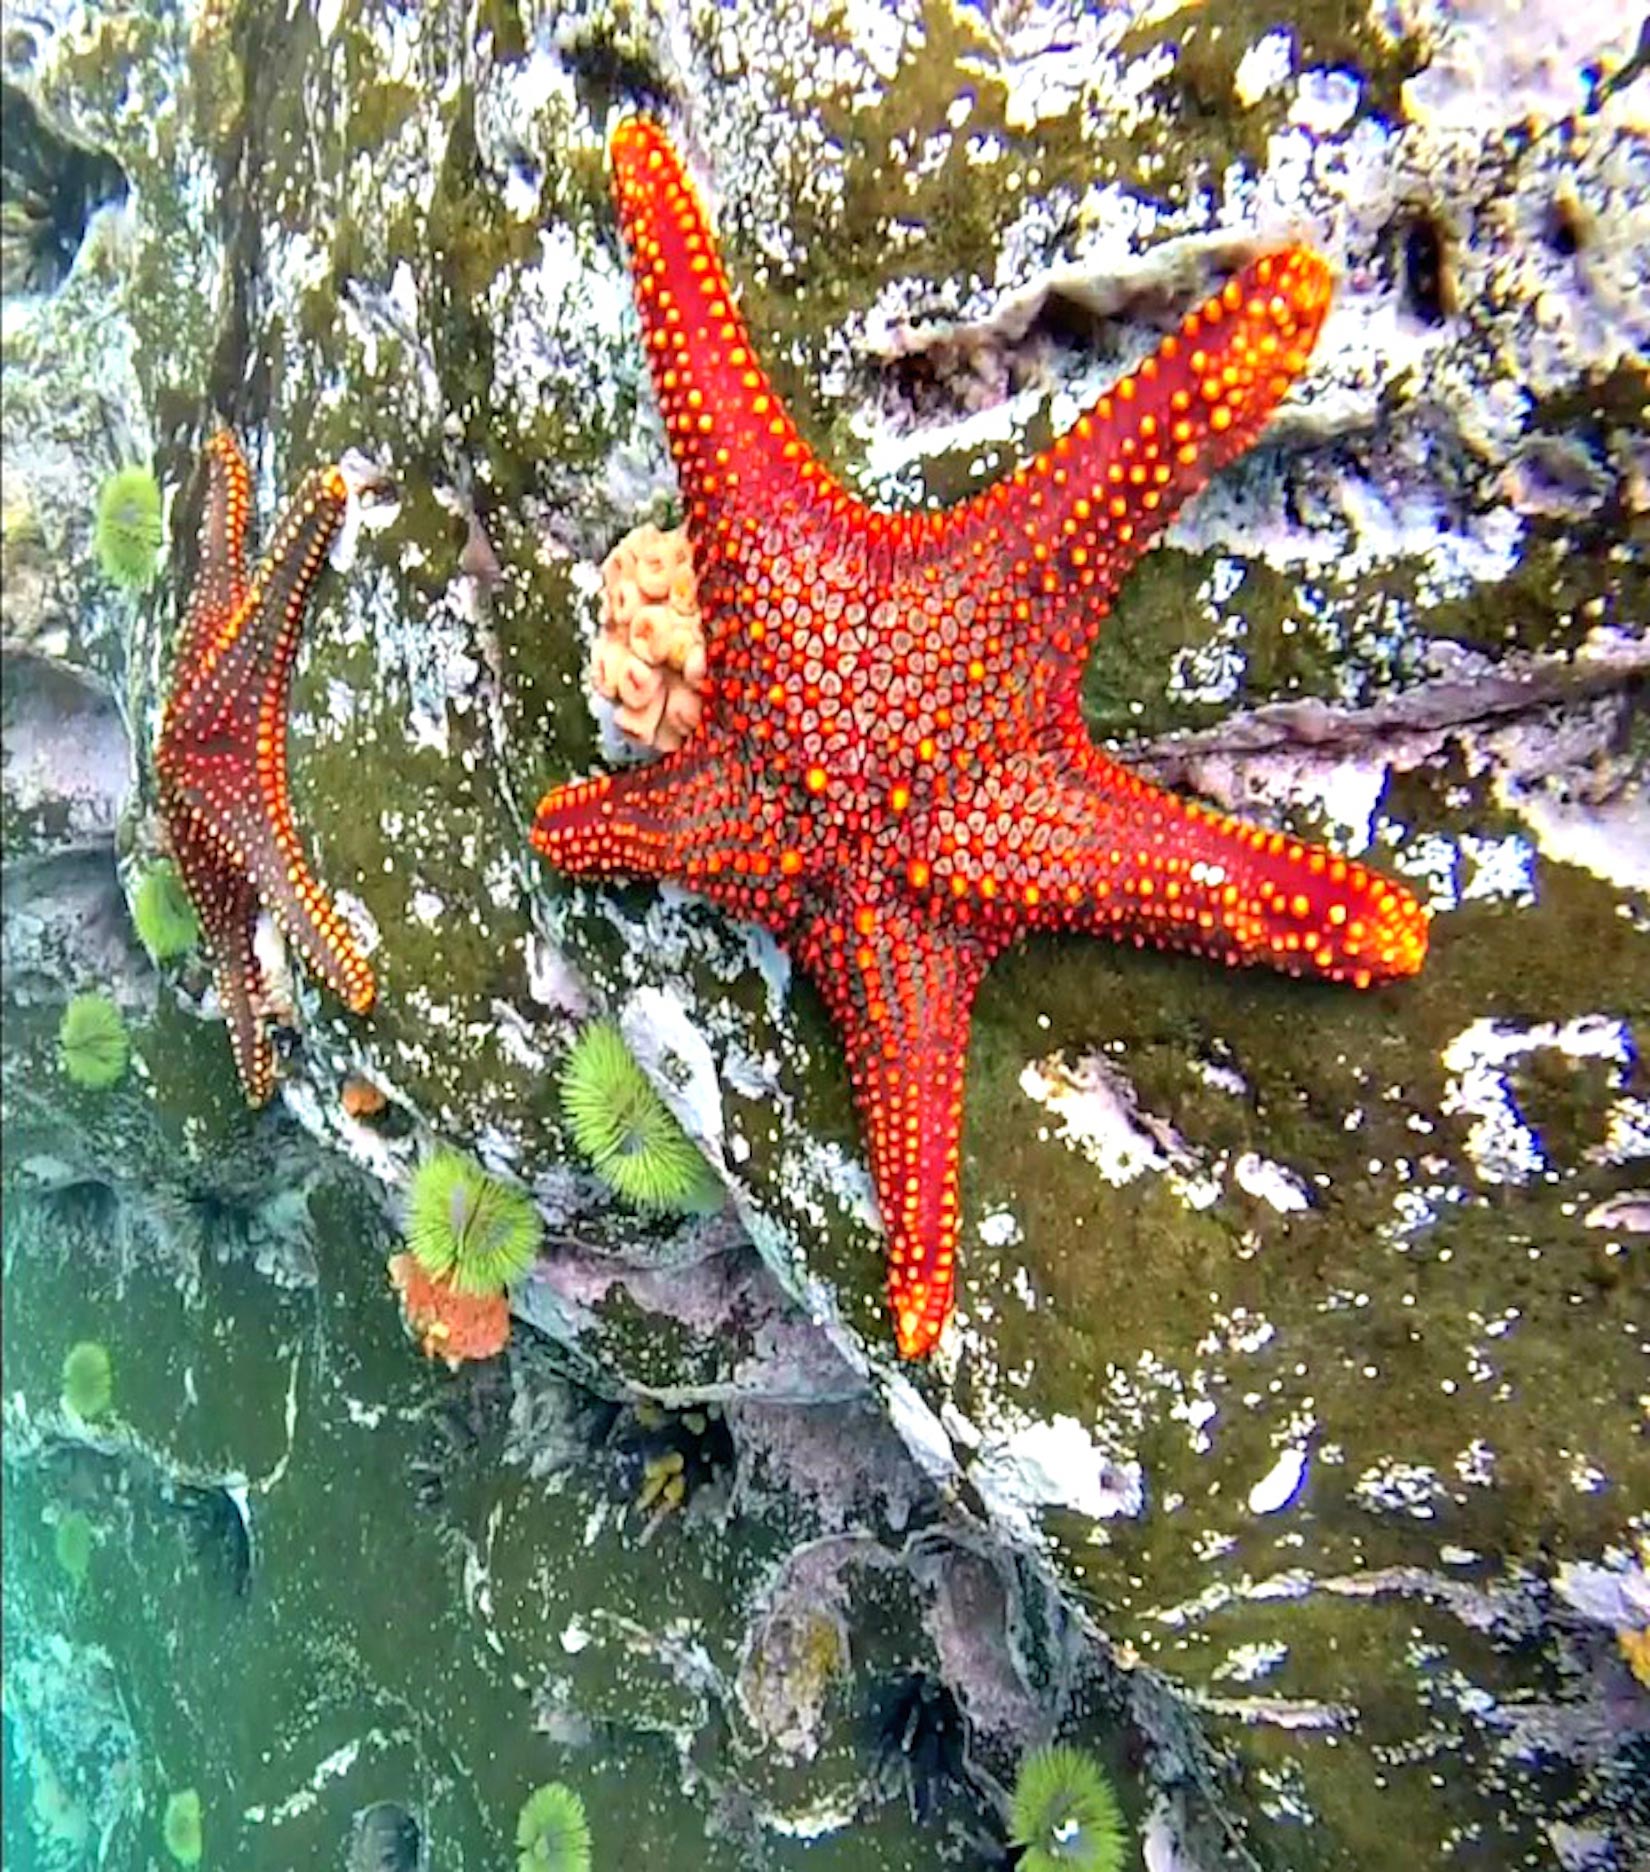 starfish on a rock in the ocean